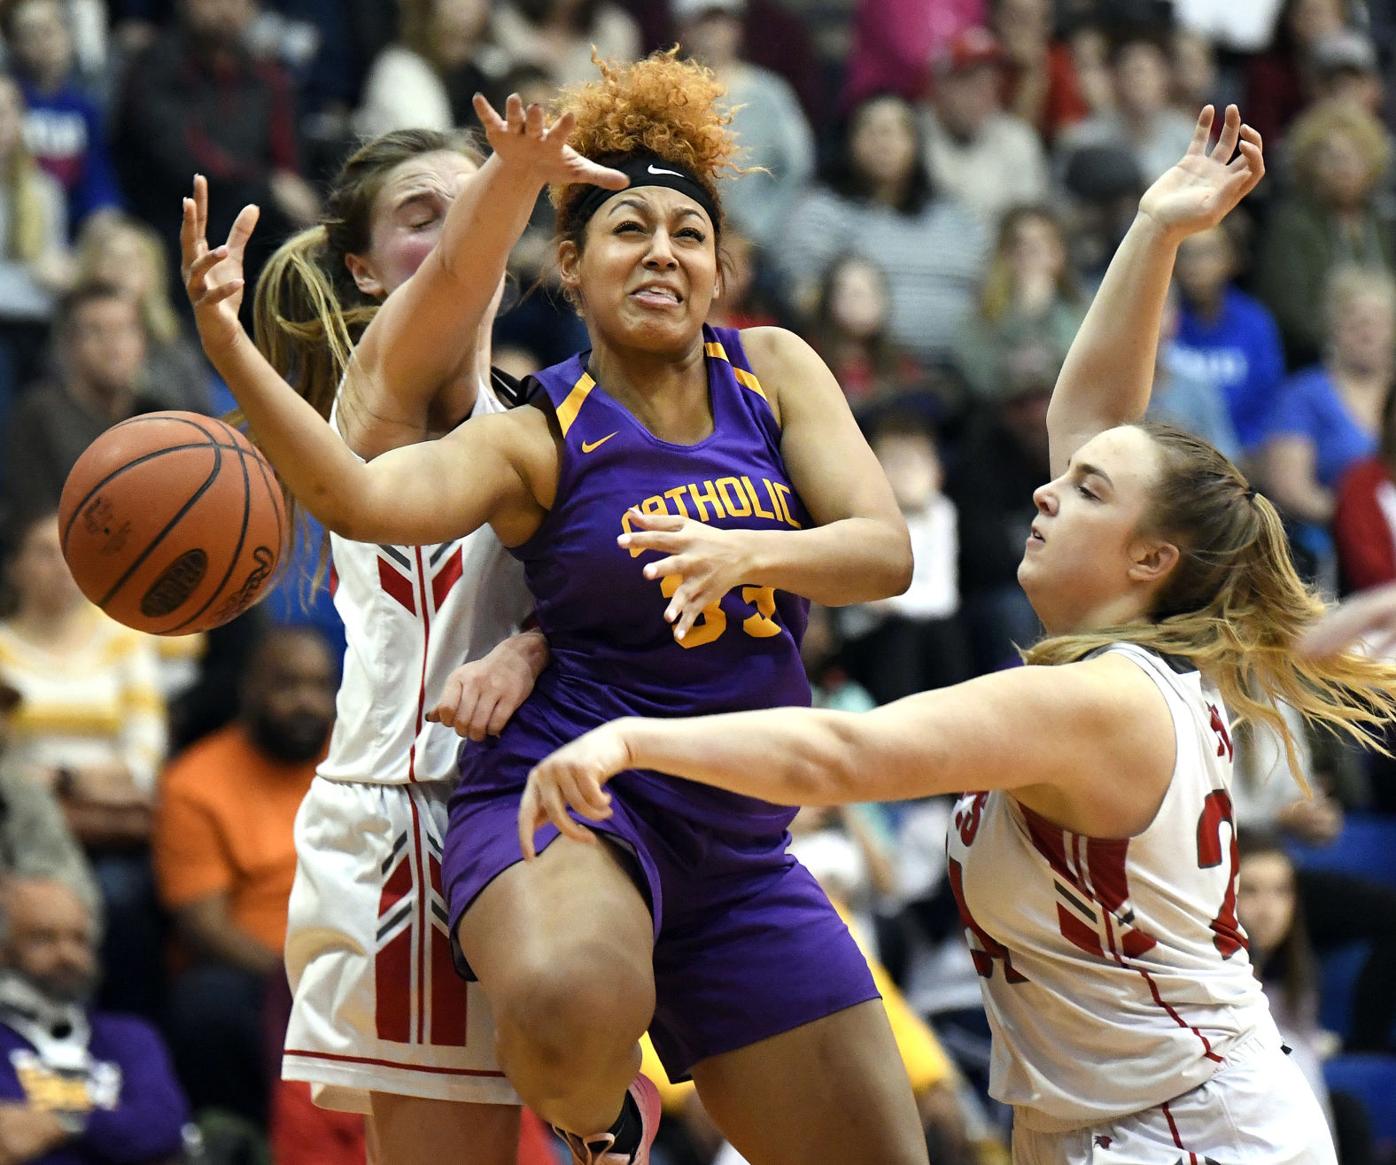 Lancaster Catholic tops Pequea Valley 3rd L-L League girls basketball championship in a row | Sports |